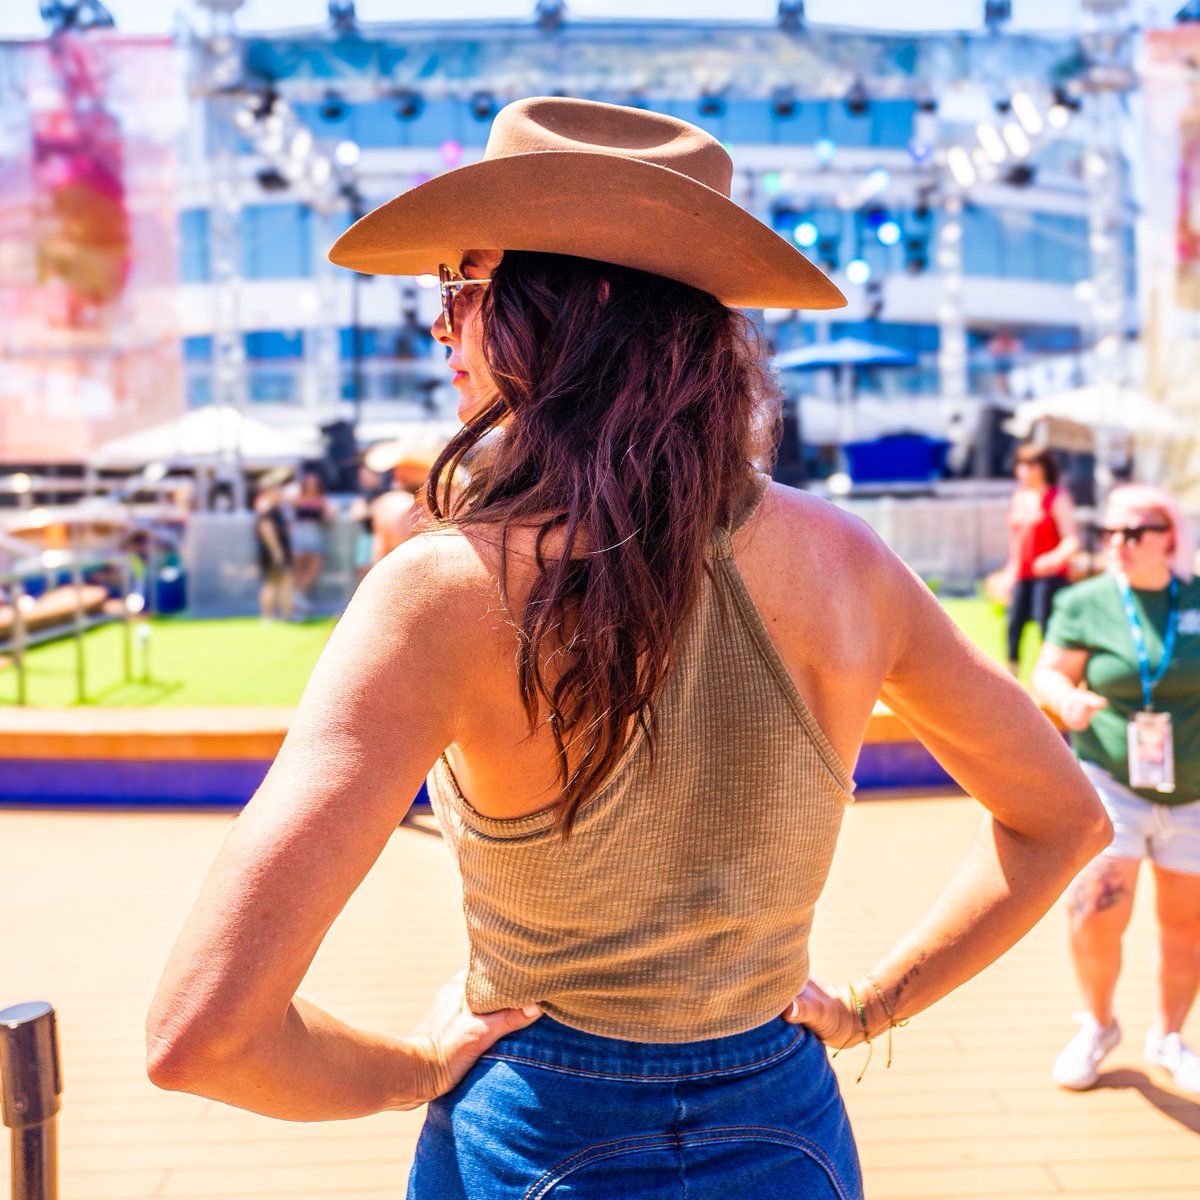 💥 Don't miss the boat, jump aboard Boots on the Water! Get your cabin now, once they're gone there's no goin' back 💥 Book yours at BootsontheWaterCruise.com! 🛳️